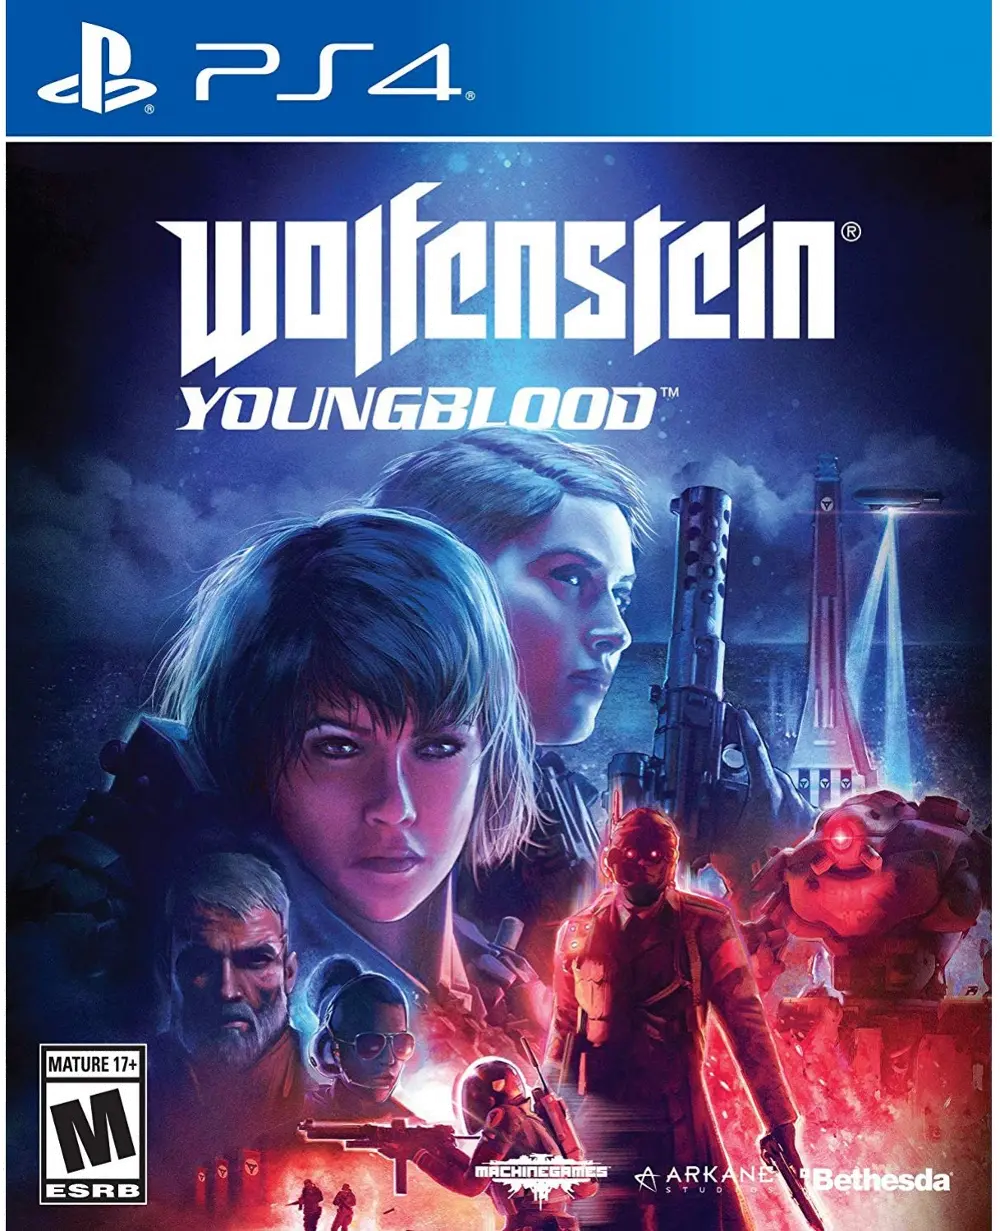 PS4 BET 17401 Wolfenstein: Youngblood - PS4-1